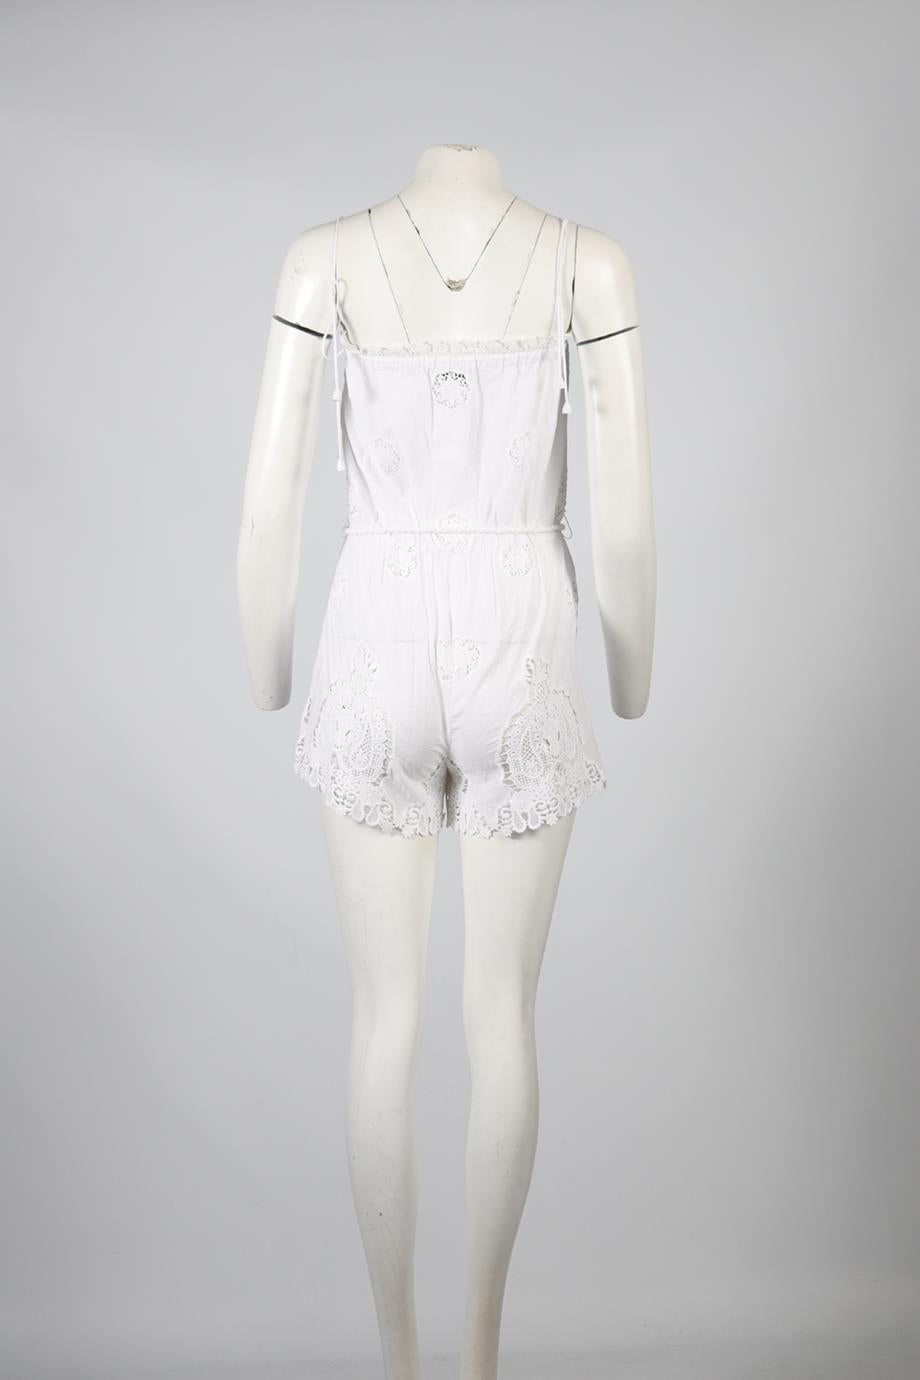 MIGUELINA COTTON PLAYSUIT SMALL